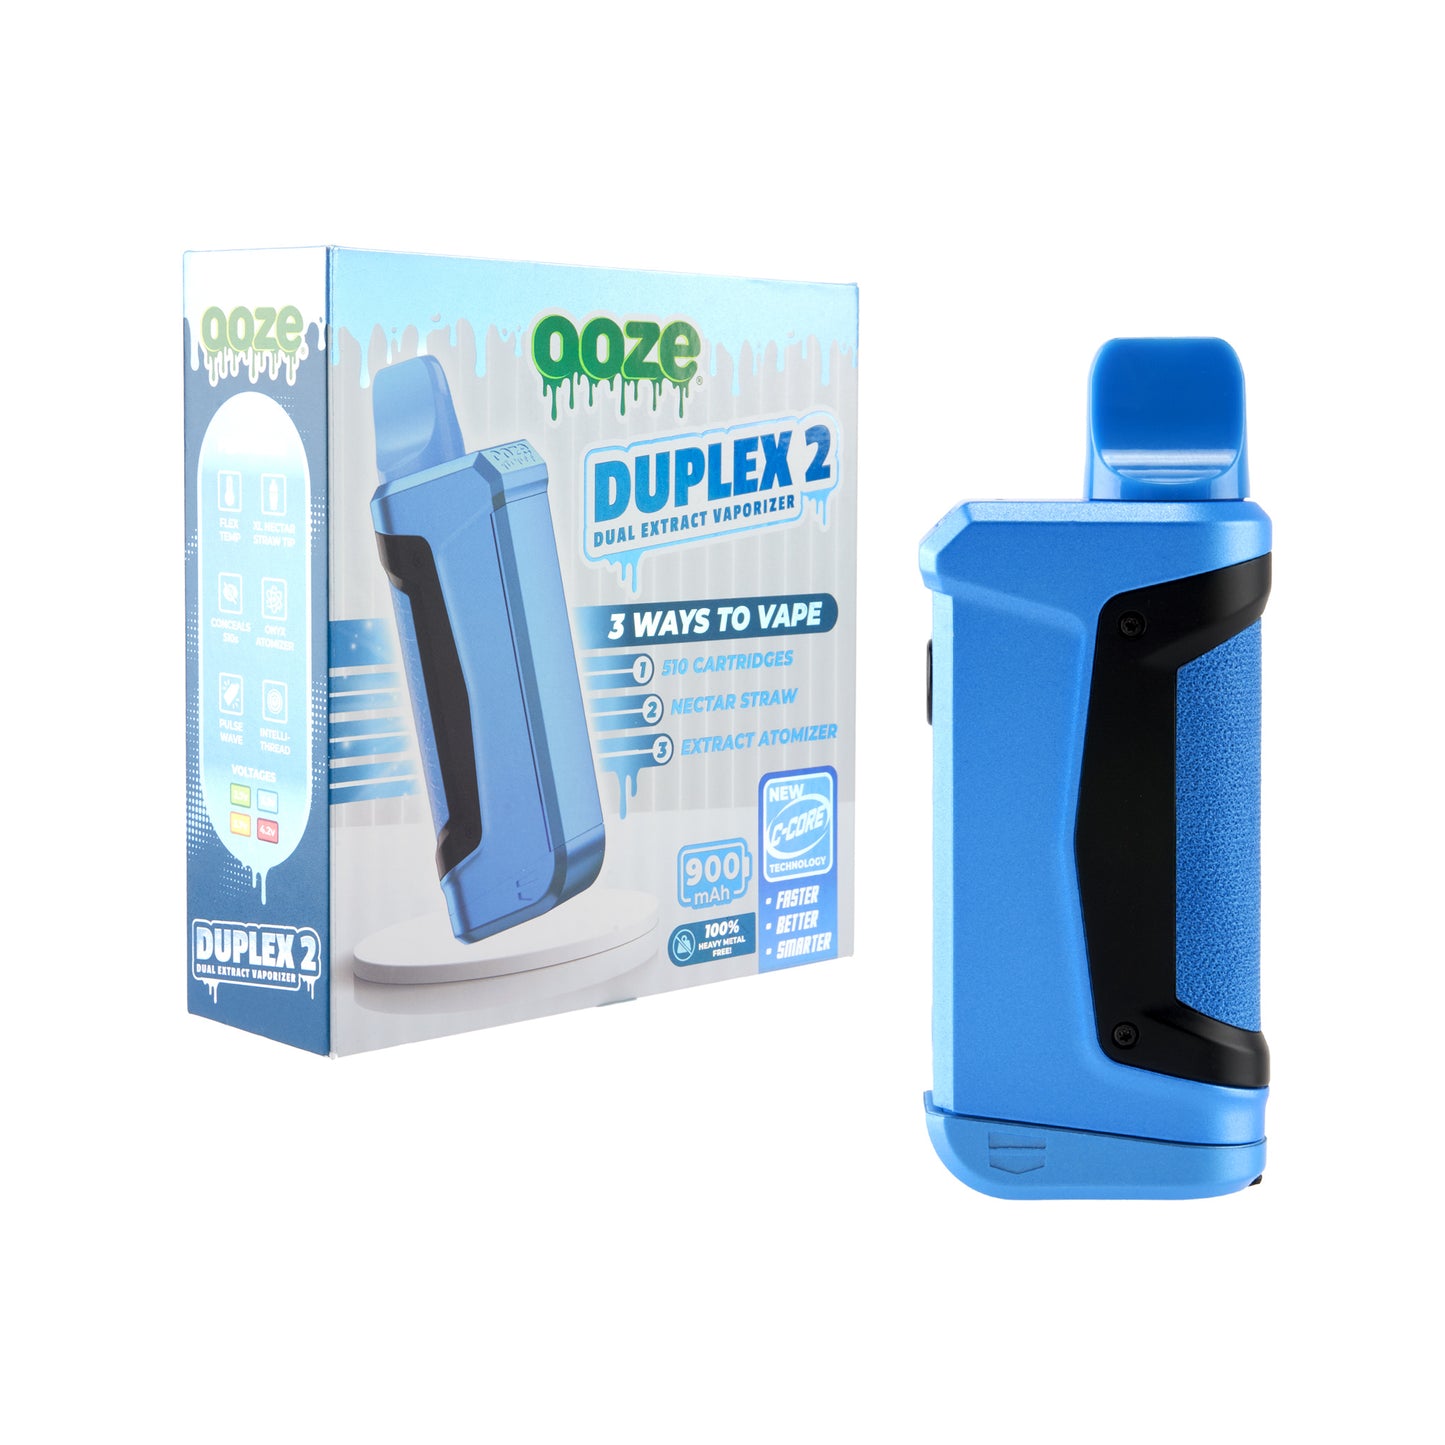 The arctic blue Ooze Duplex 2 extract vaporizer is shown next to the box